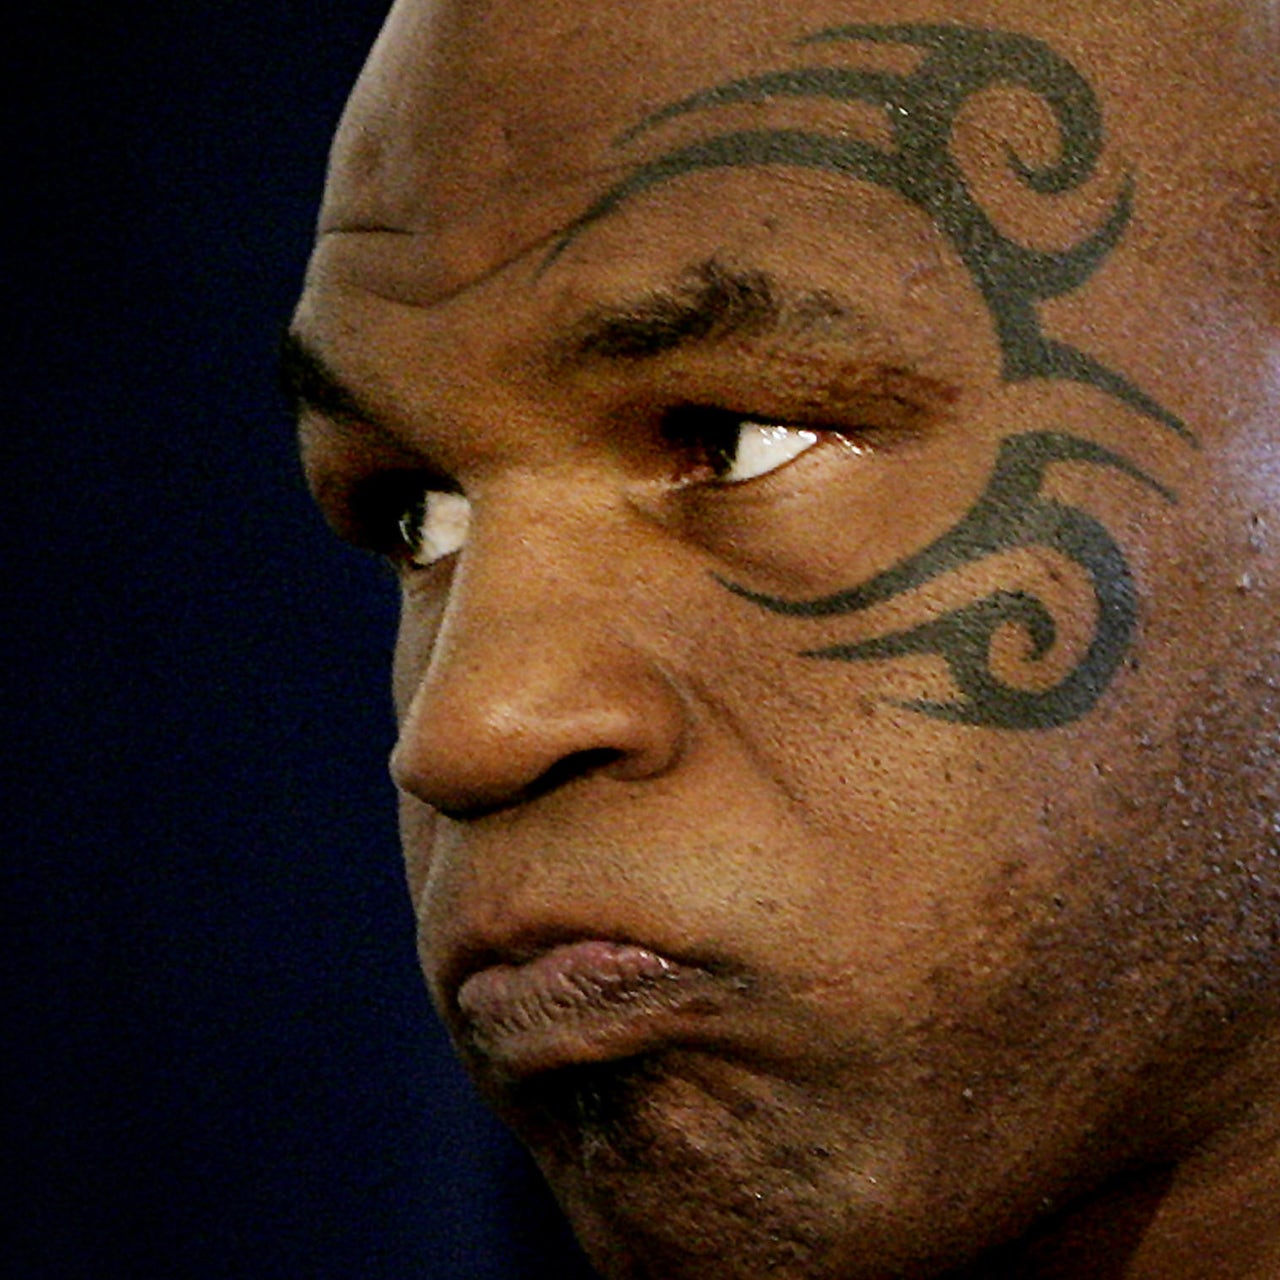 Mike Tyson says 'a lot of good stuff' happened because of his face tattoo